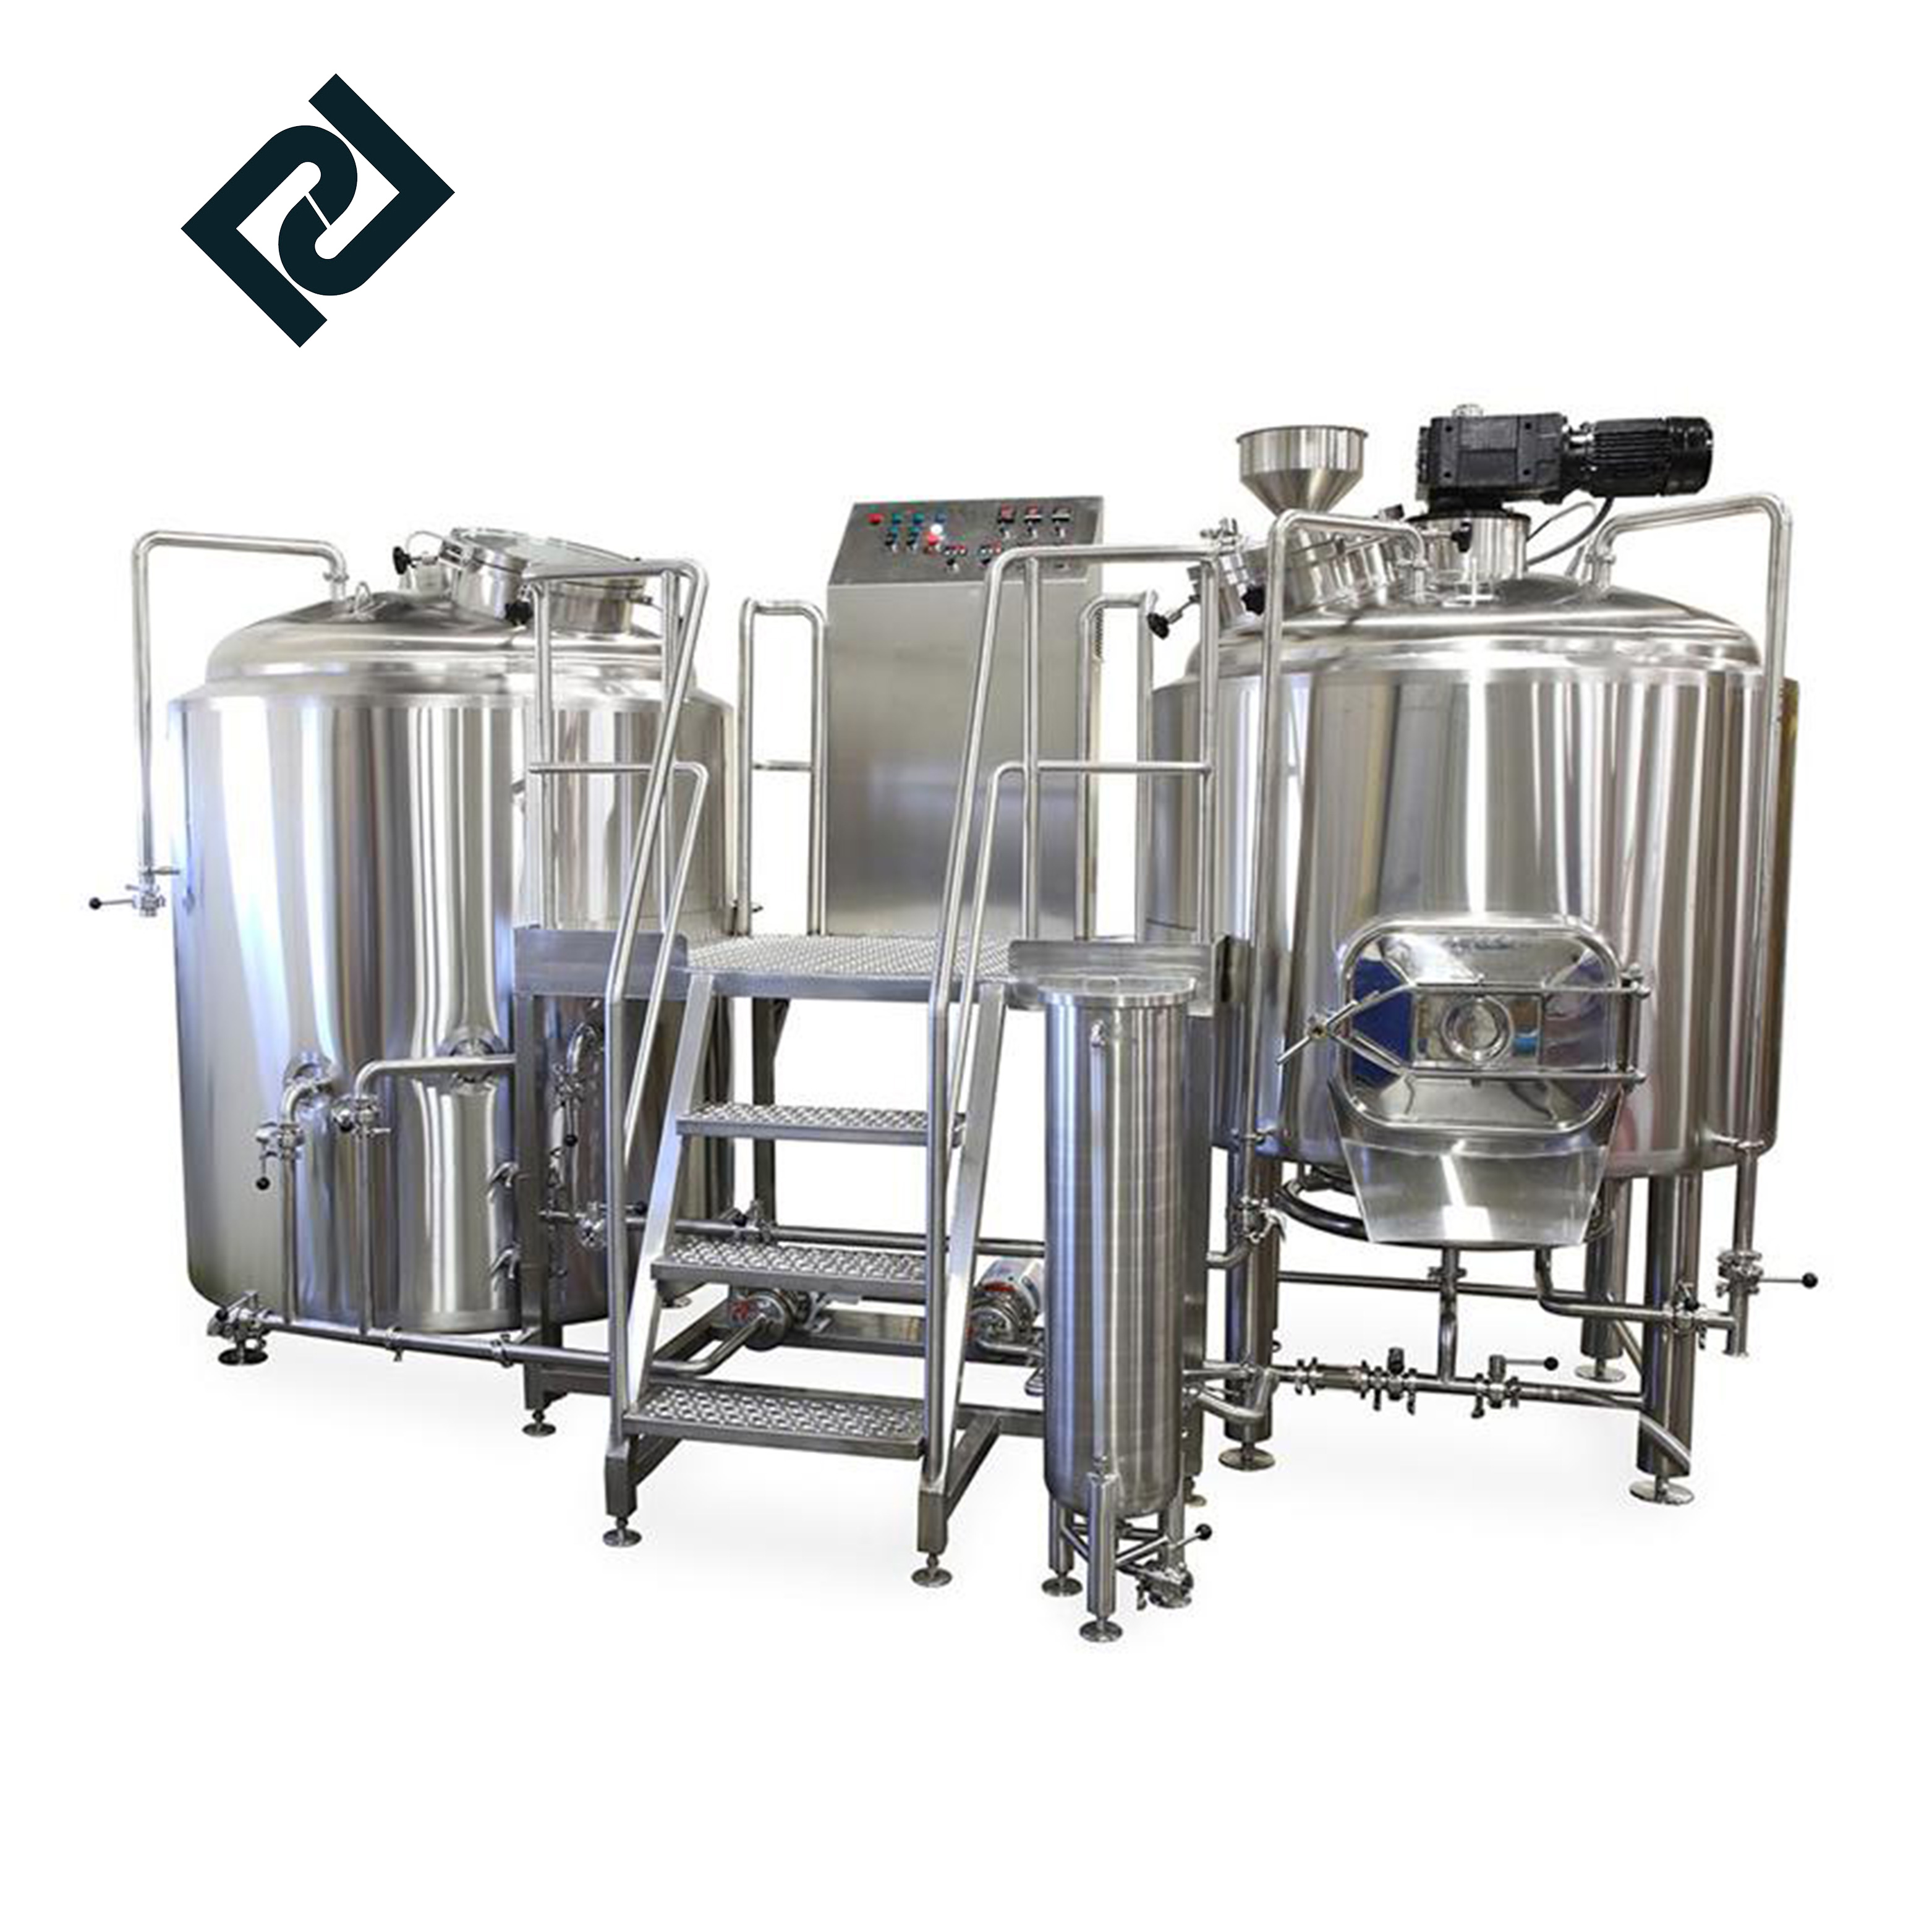 OEM/ODM China 7 Bbl Commercial Brewery Beer Brewing - 10bbl brite tank for beer 1000l beer fermenter tank 1000 liters beer brewing equipment – Pijiang